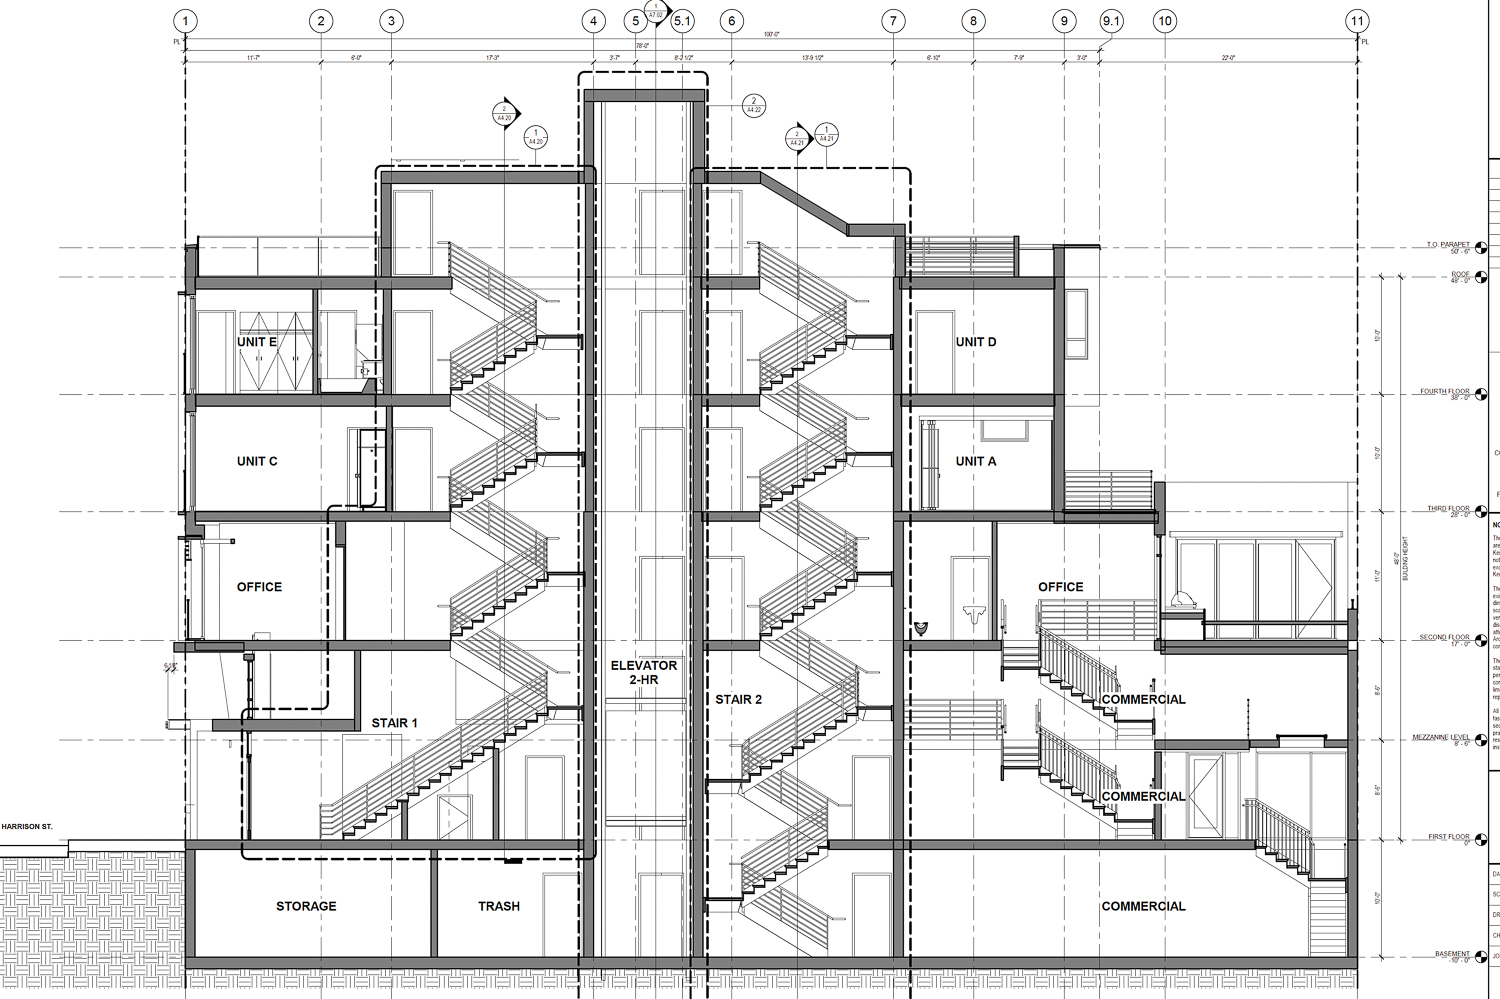 2455 Harrison Street vertical section from east to west, elevation by Kerman Morris Architects